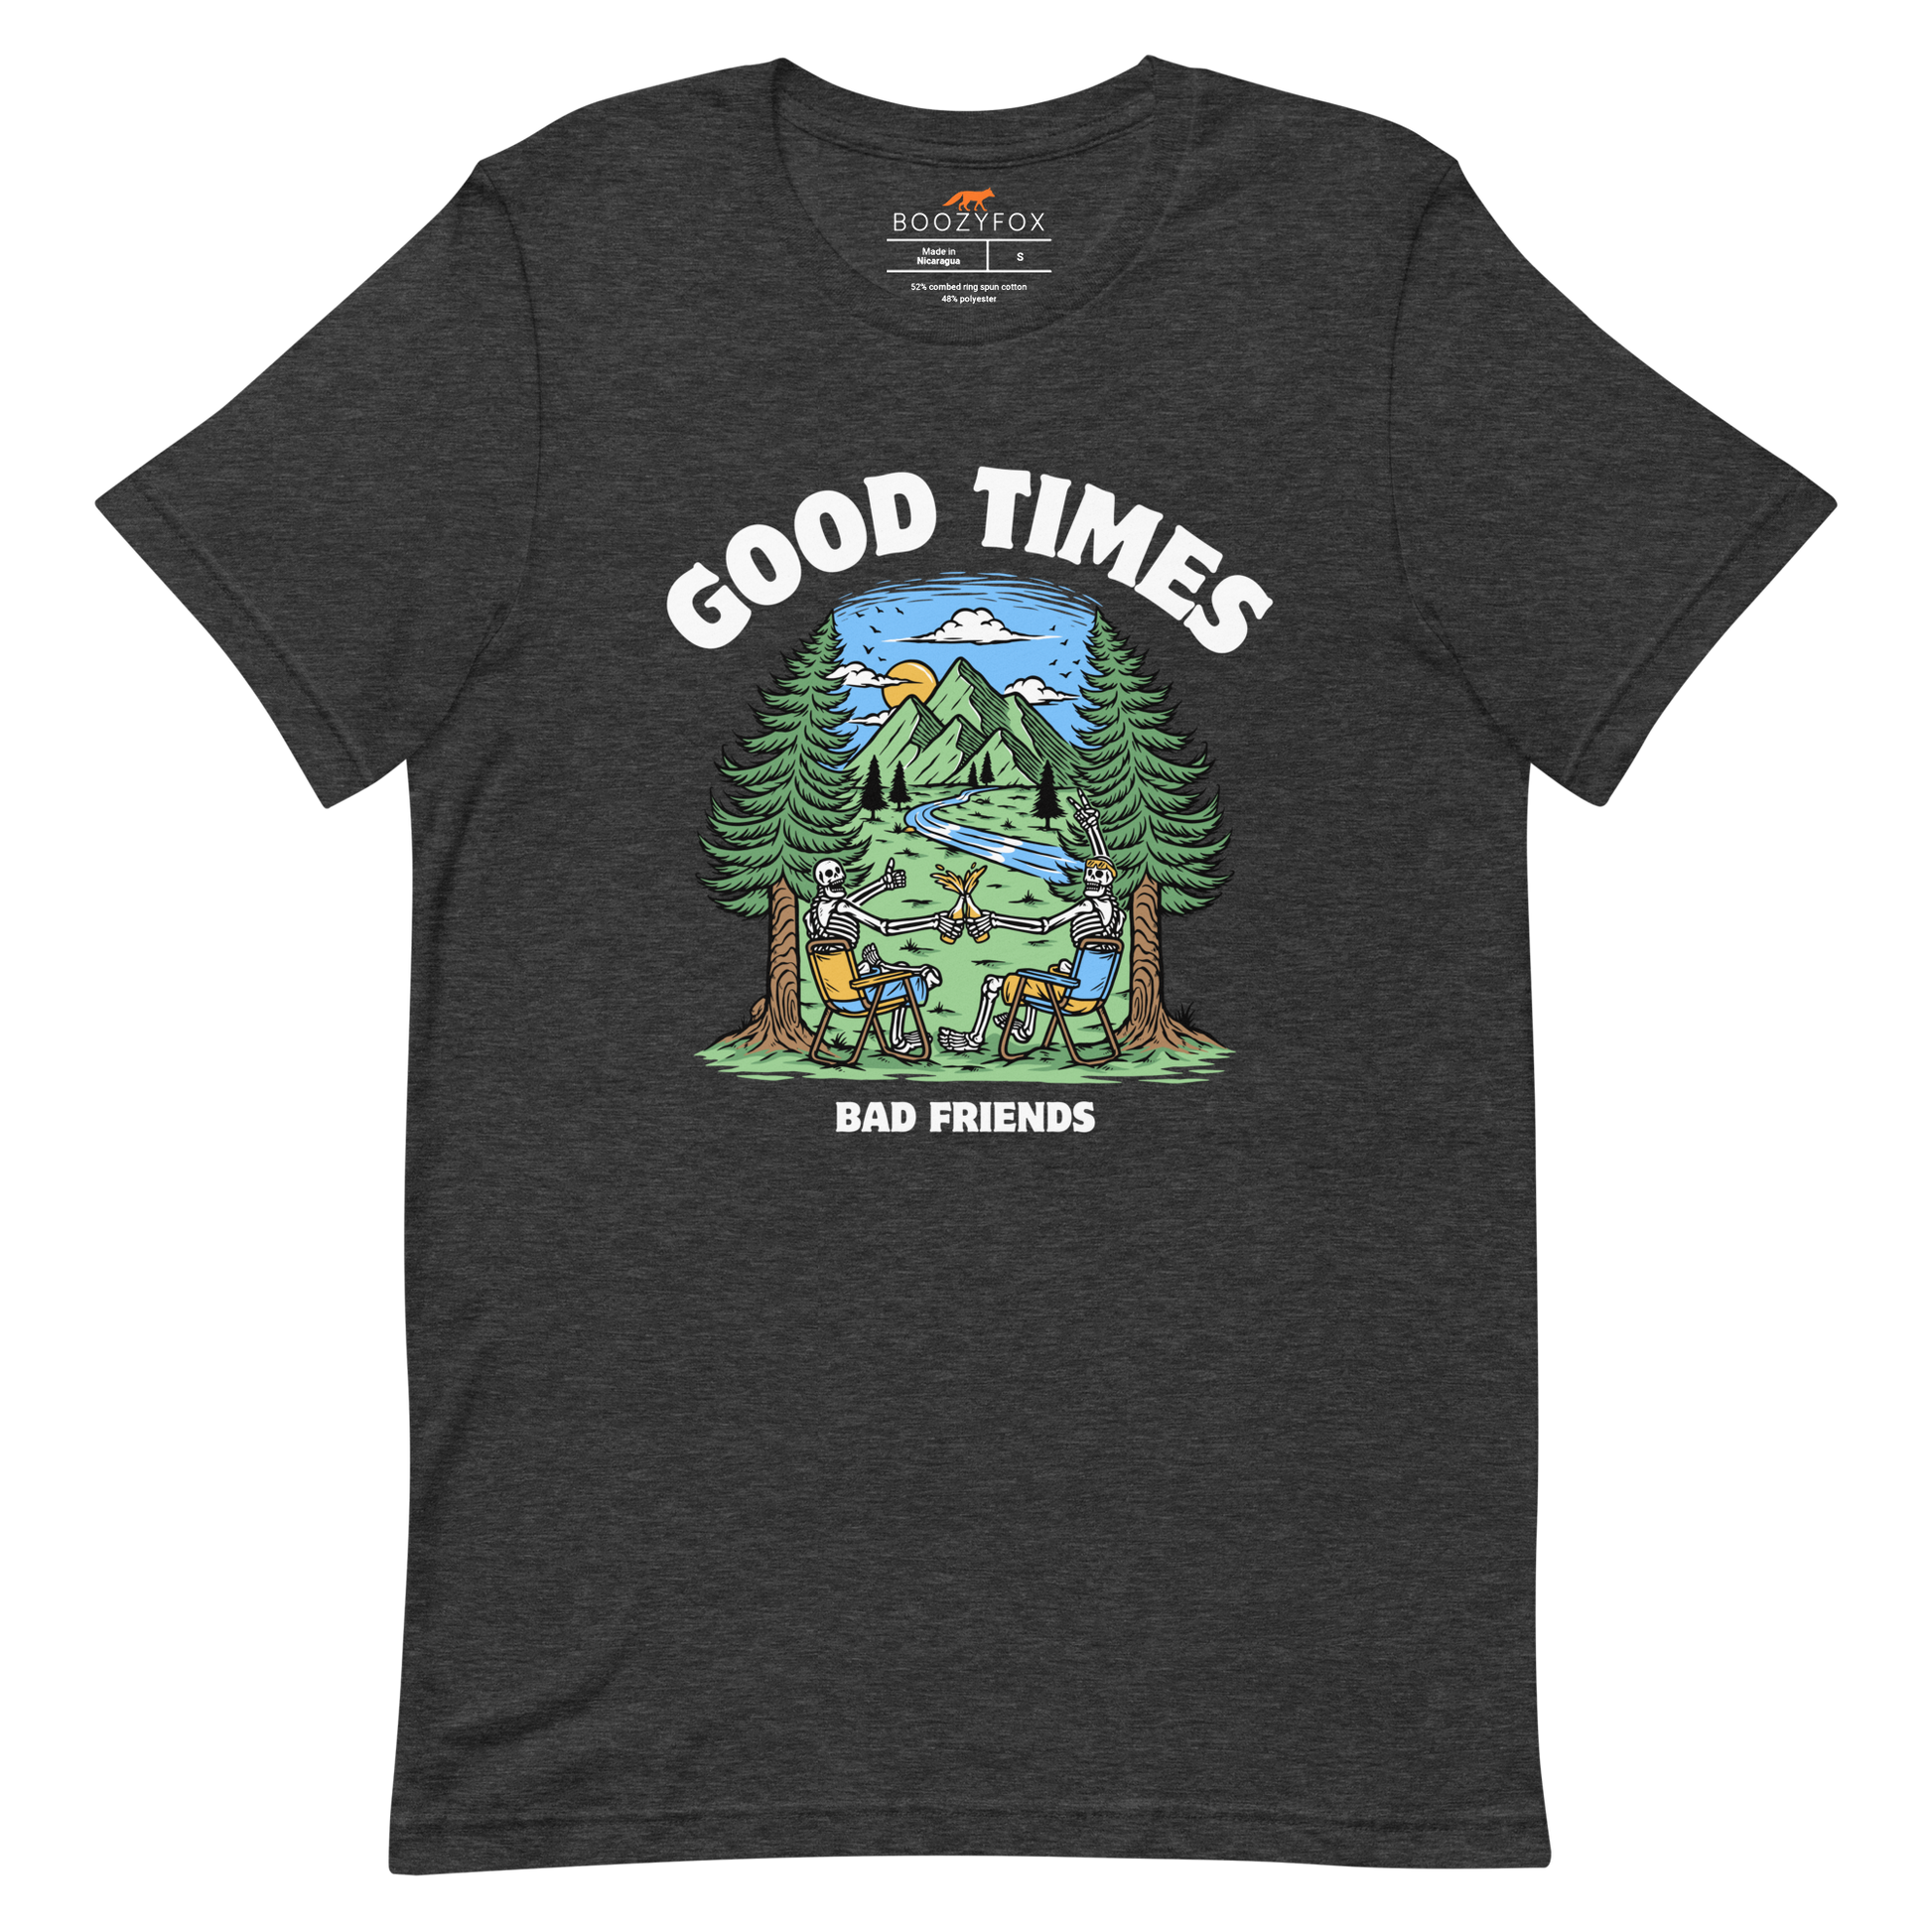 Dark Grey Heather Premium Good Times Bad Friends Tee featuring a lively graphic of friends enjoying a beer in nature - Funny Graphic Nature Tees - Boozy Fox